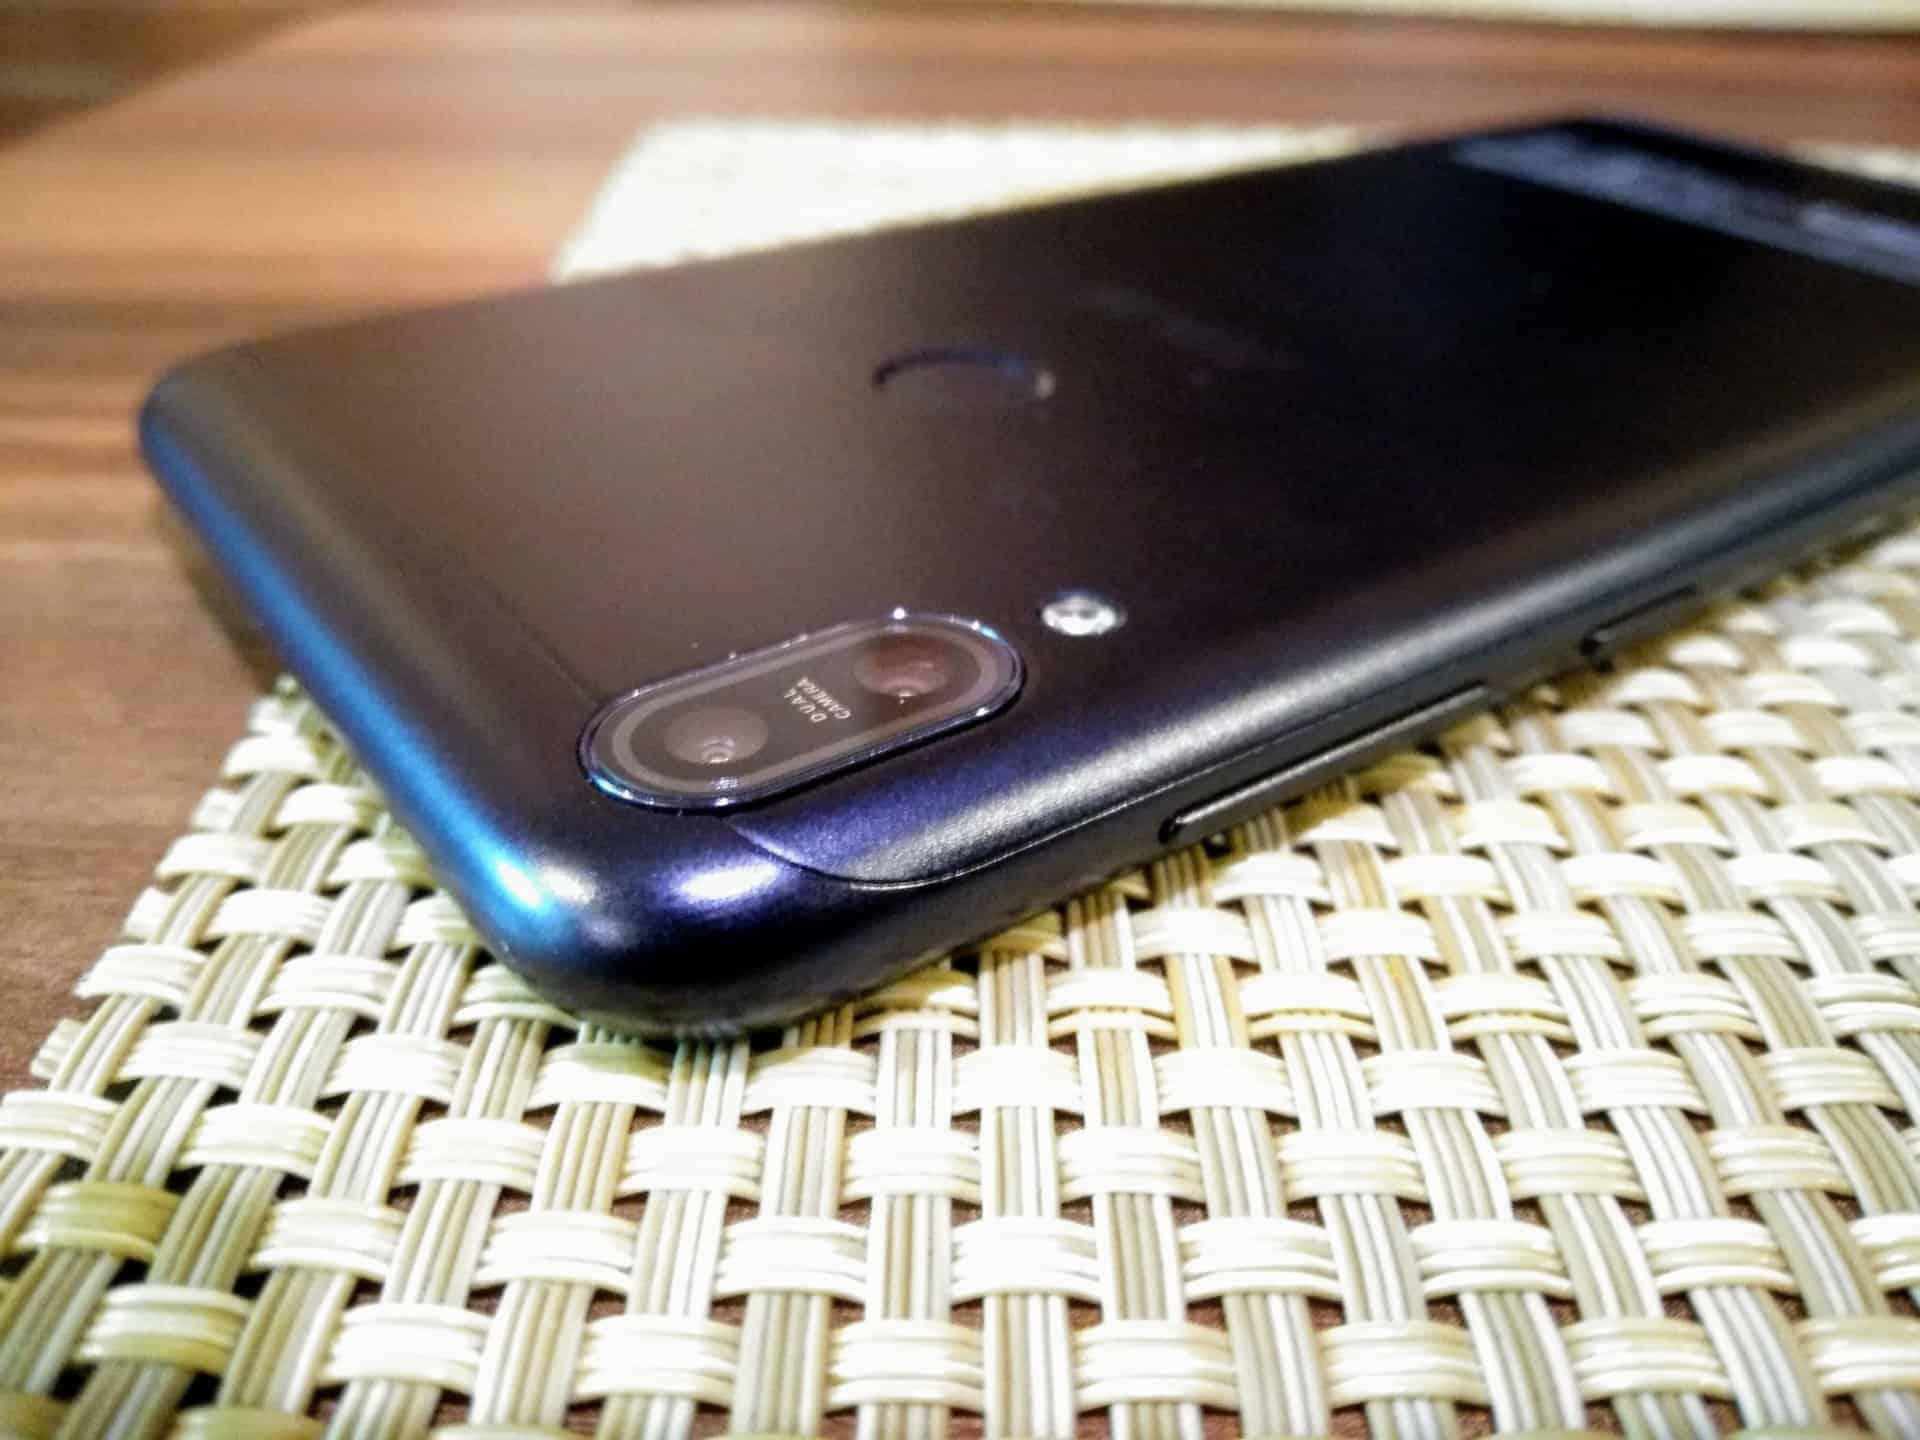 Zenfone Max Pro (M1) Hands On Review - A Truly Made For ...